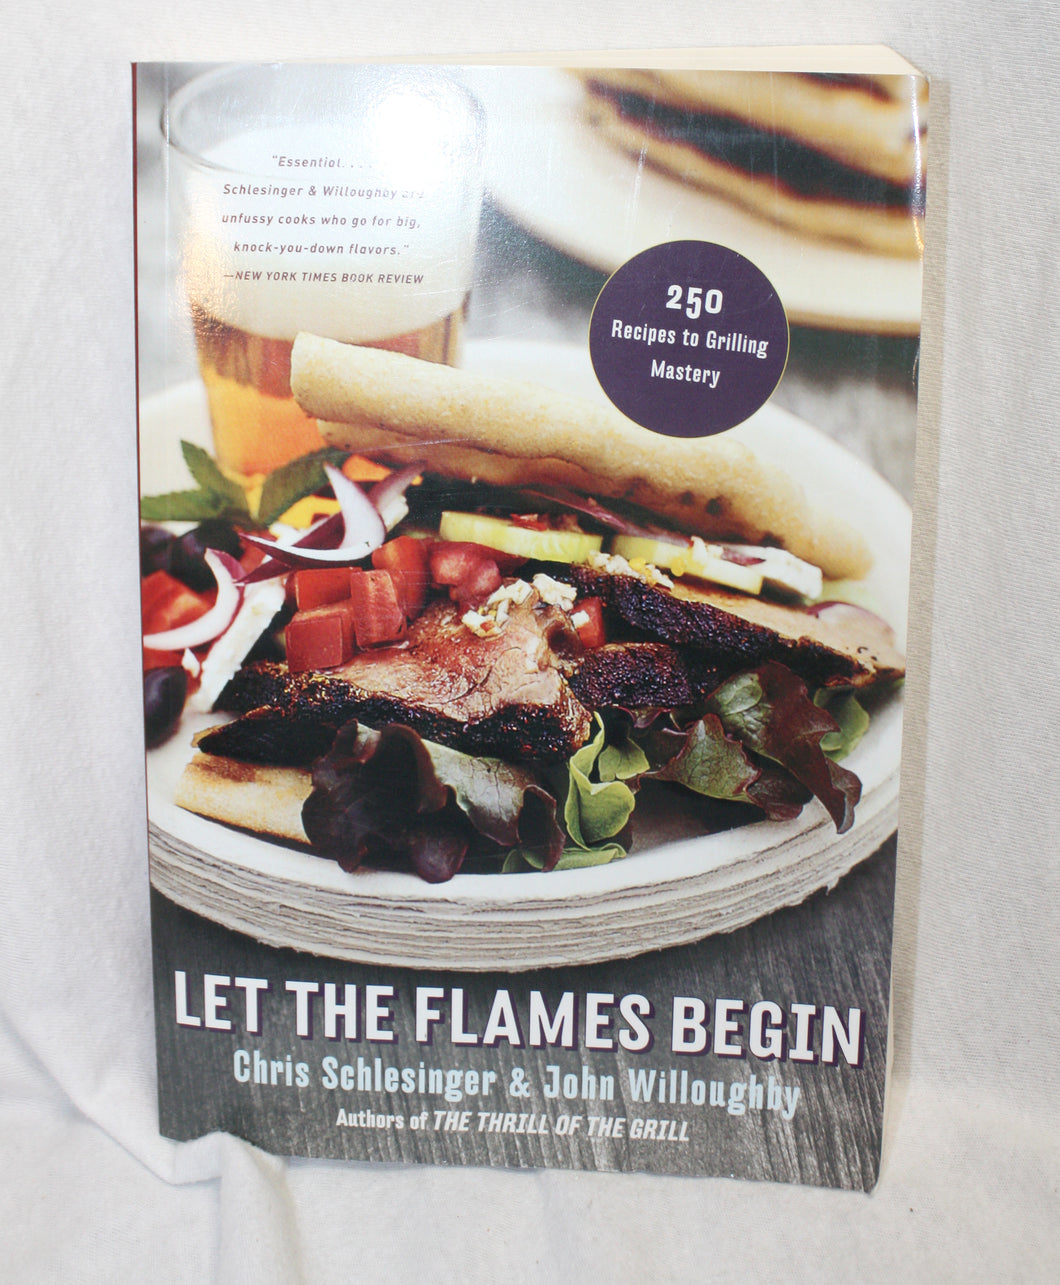 Let the Flames Begin - 250 Recipes to Grilling Mastery- Chris Schlesinger & John Willoughby - Softback Book